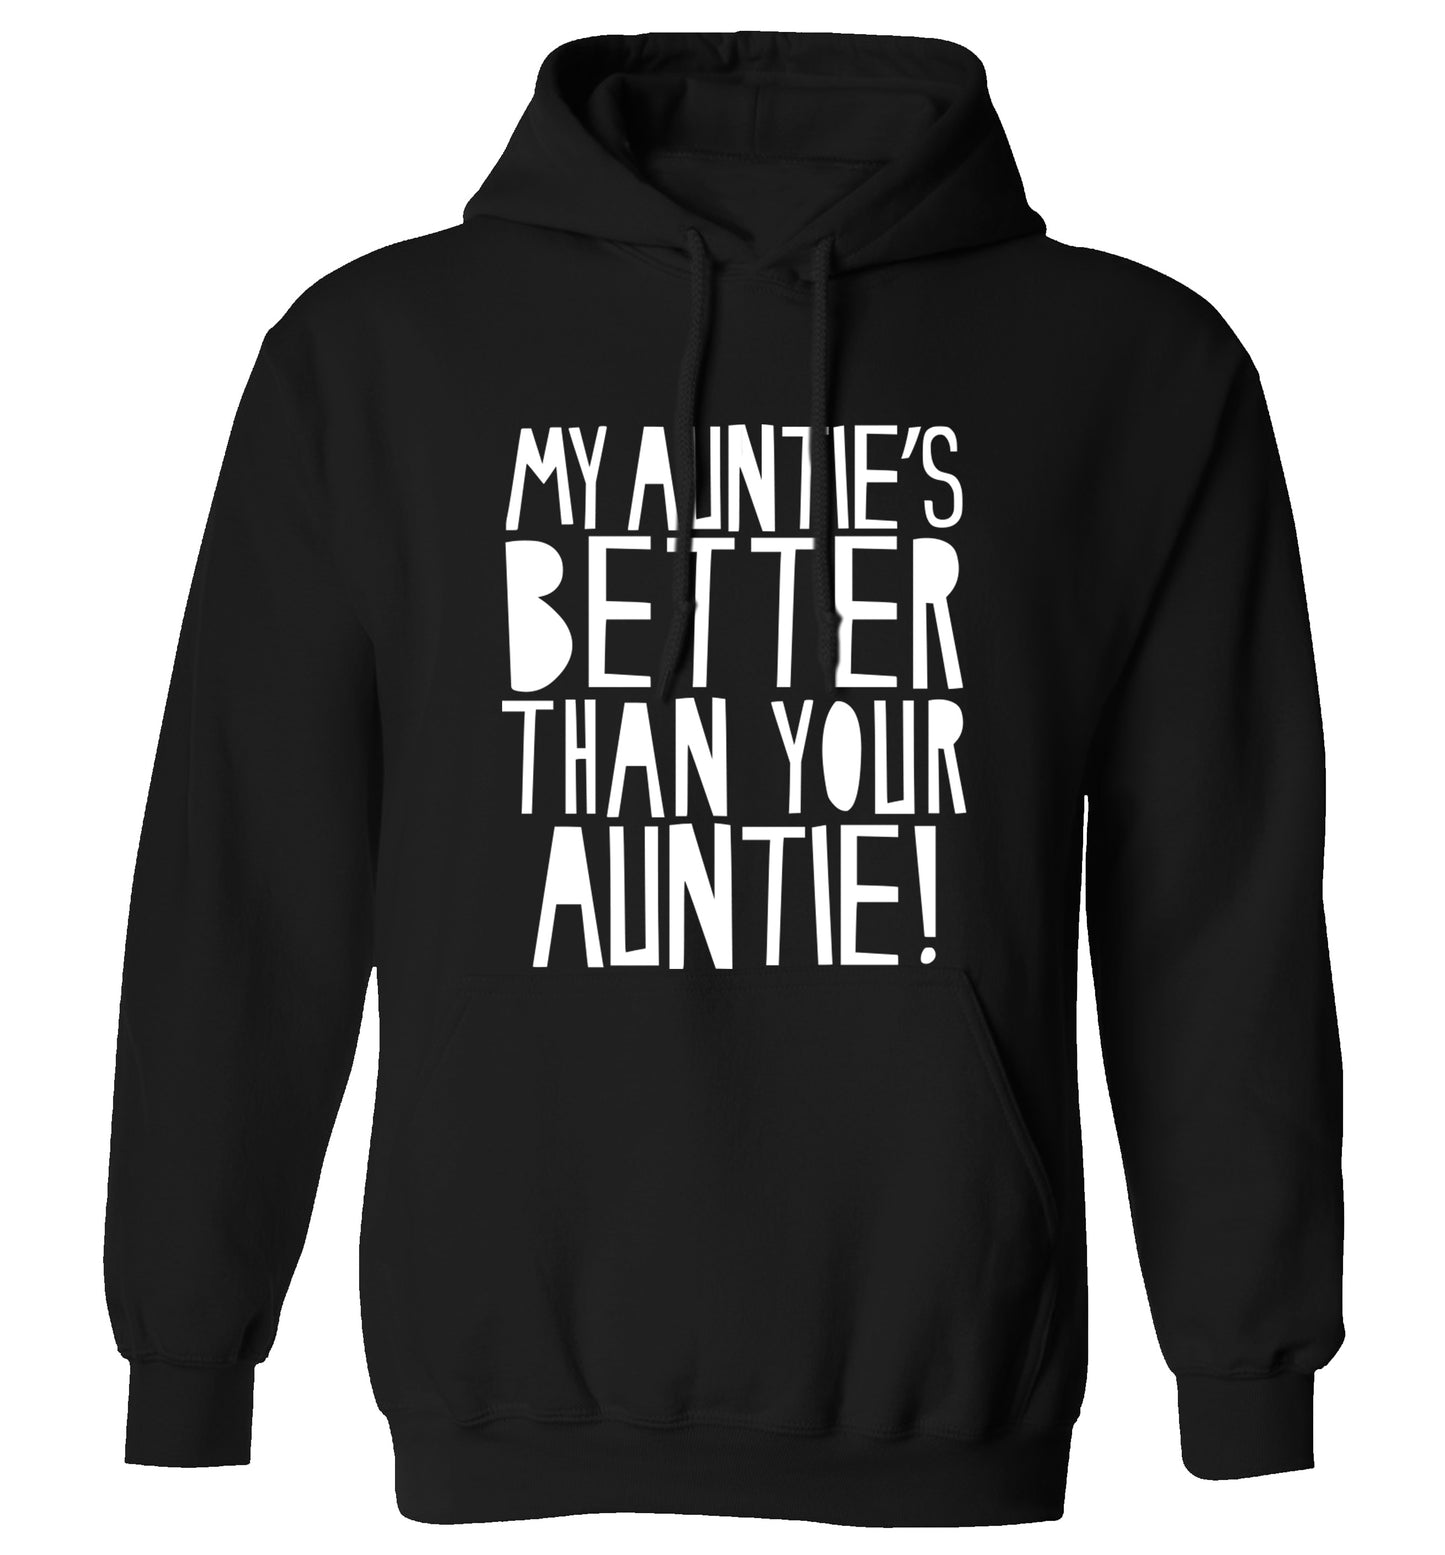 My auntie's better than your auntie adults unisex black hoodie 2XL